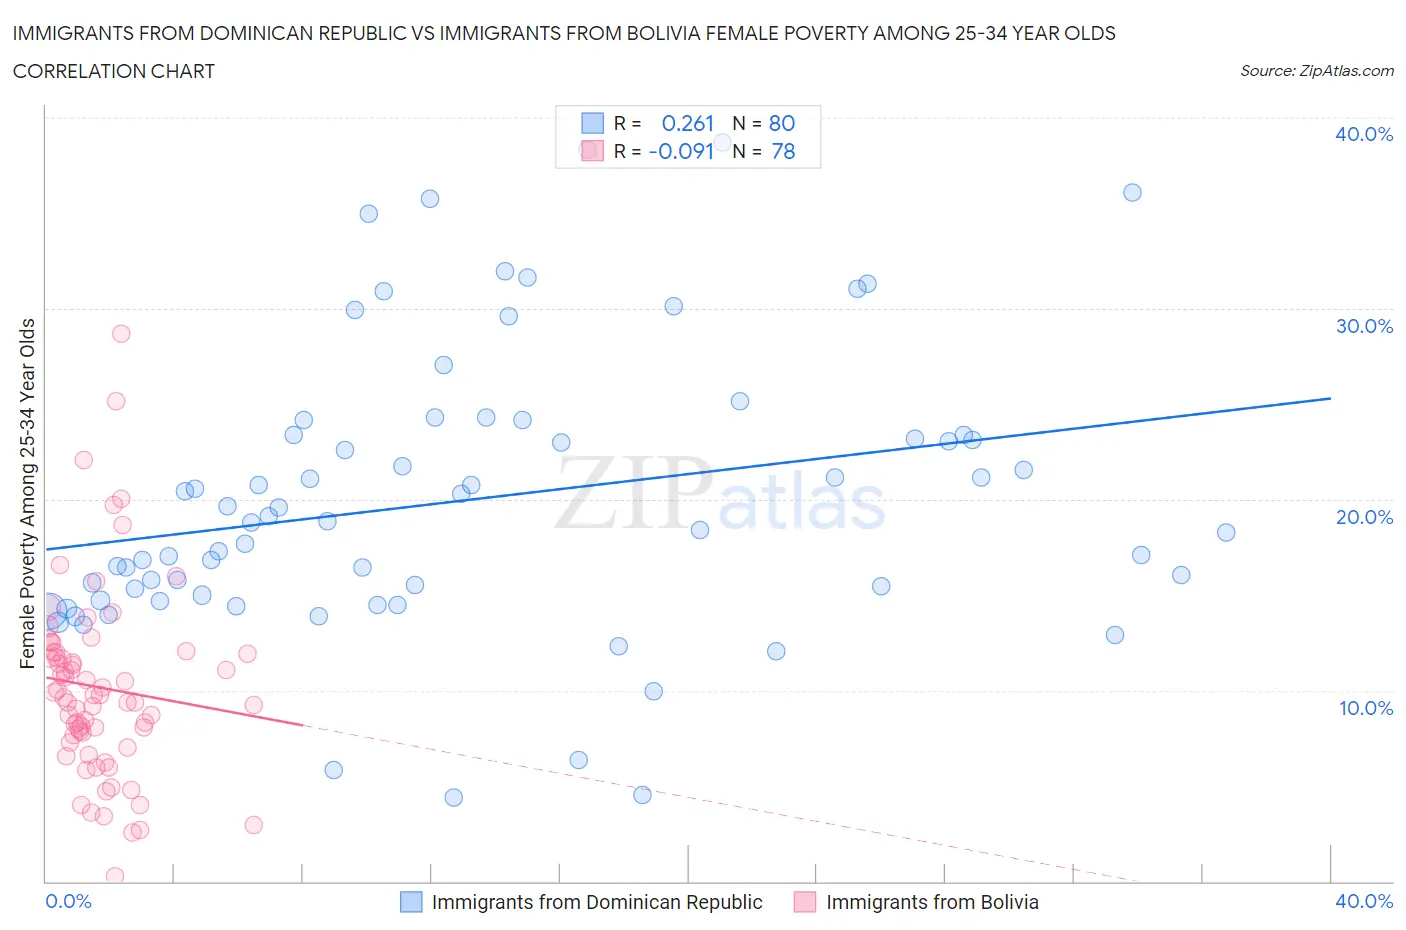 Immigrants from Dominican Republic vs Immigrants from Bolivia Female Poverty Among 25-34 Year Olds